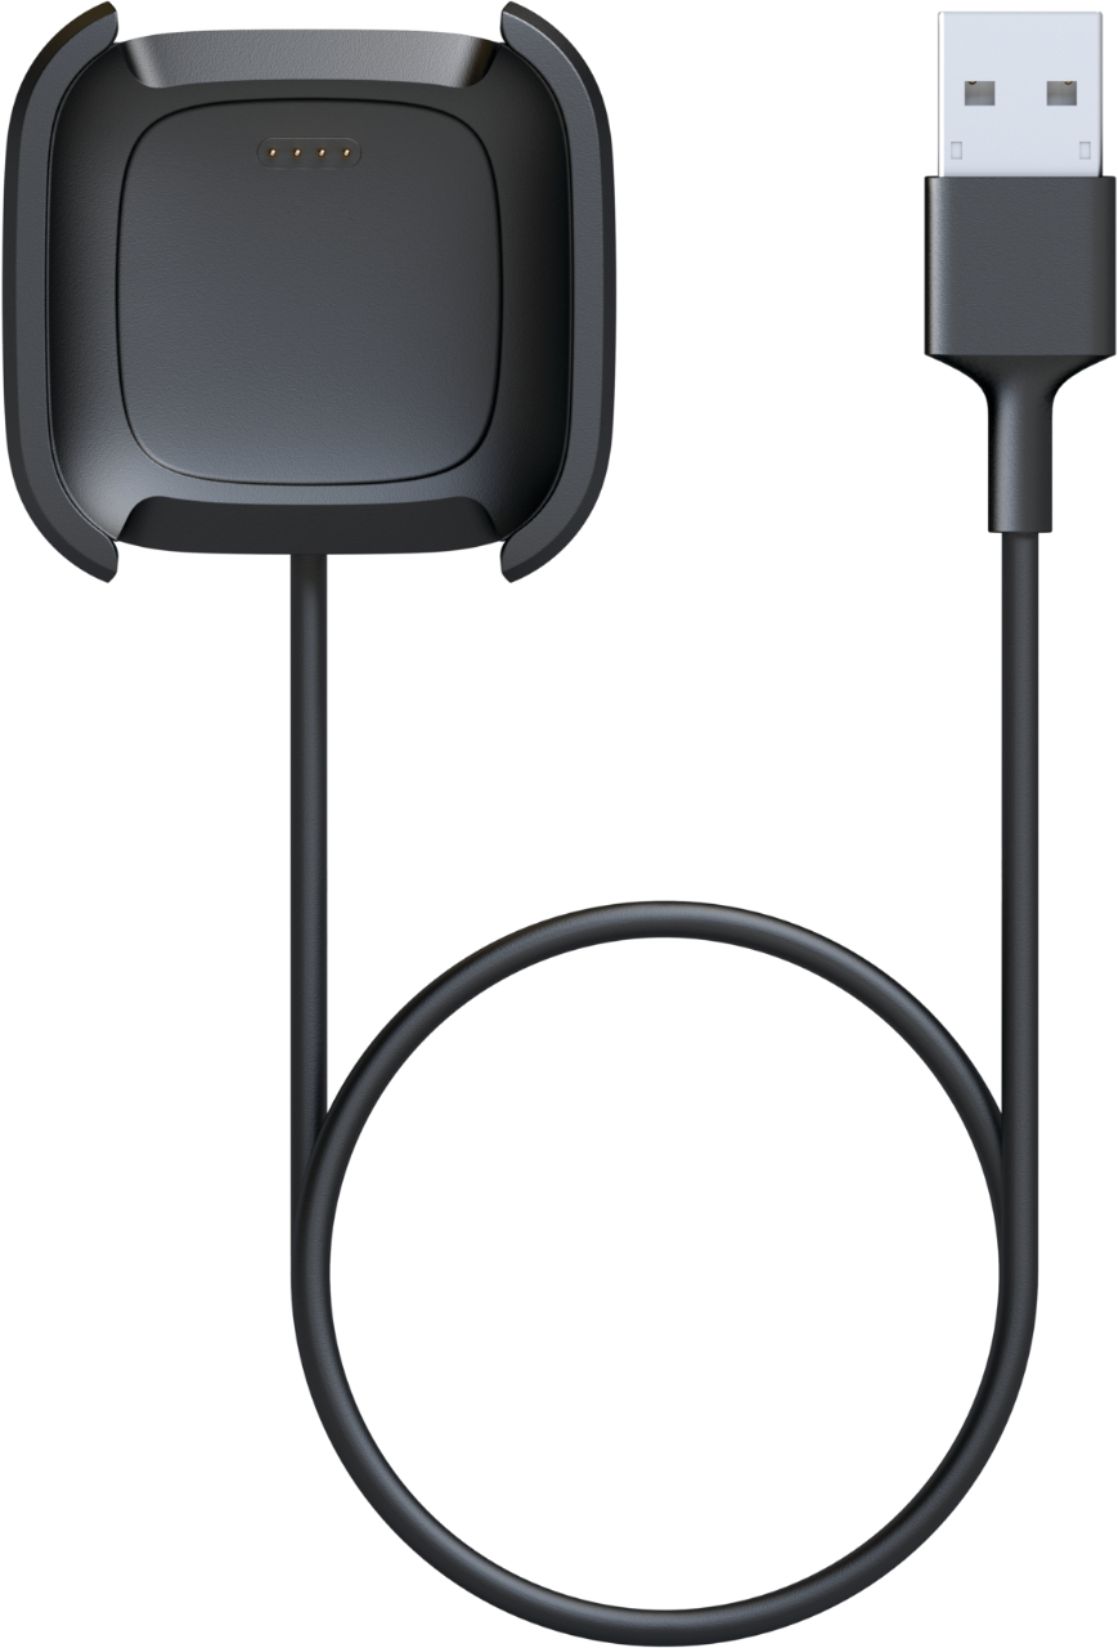 FitBit chargeHR Charging Cable USB Black Genuine Accessory New in box 